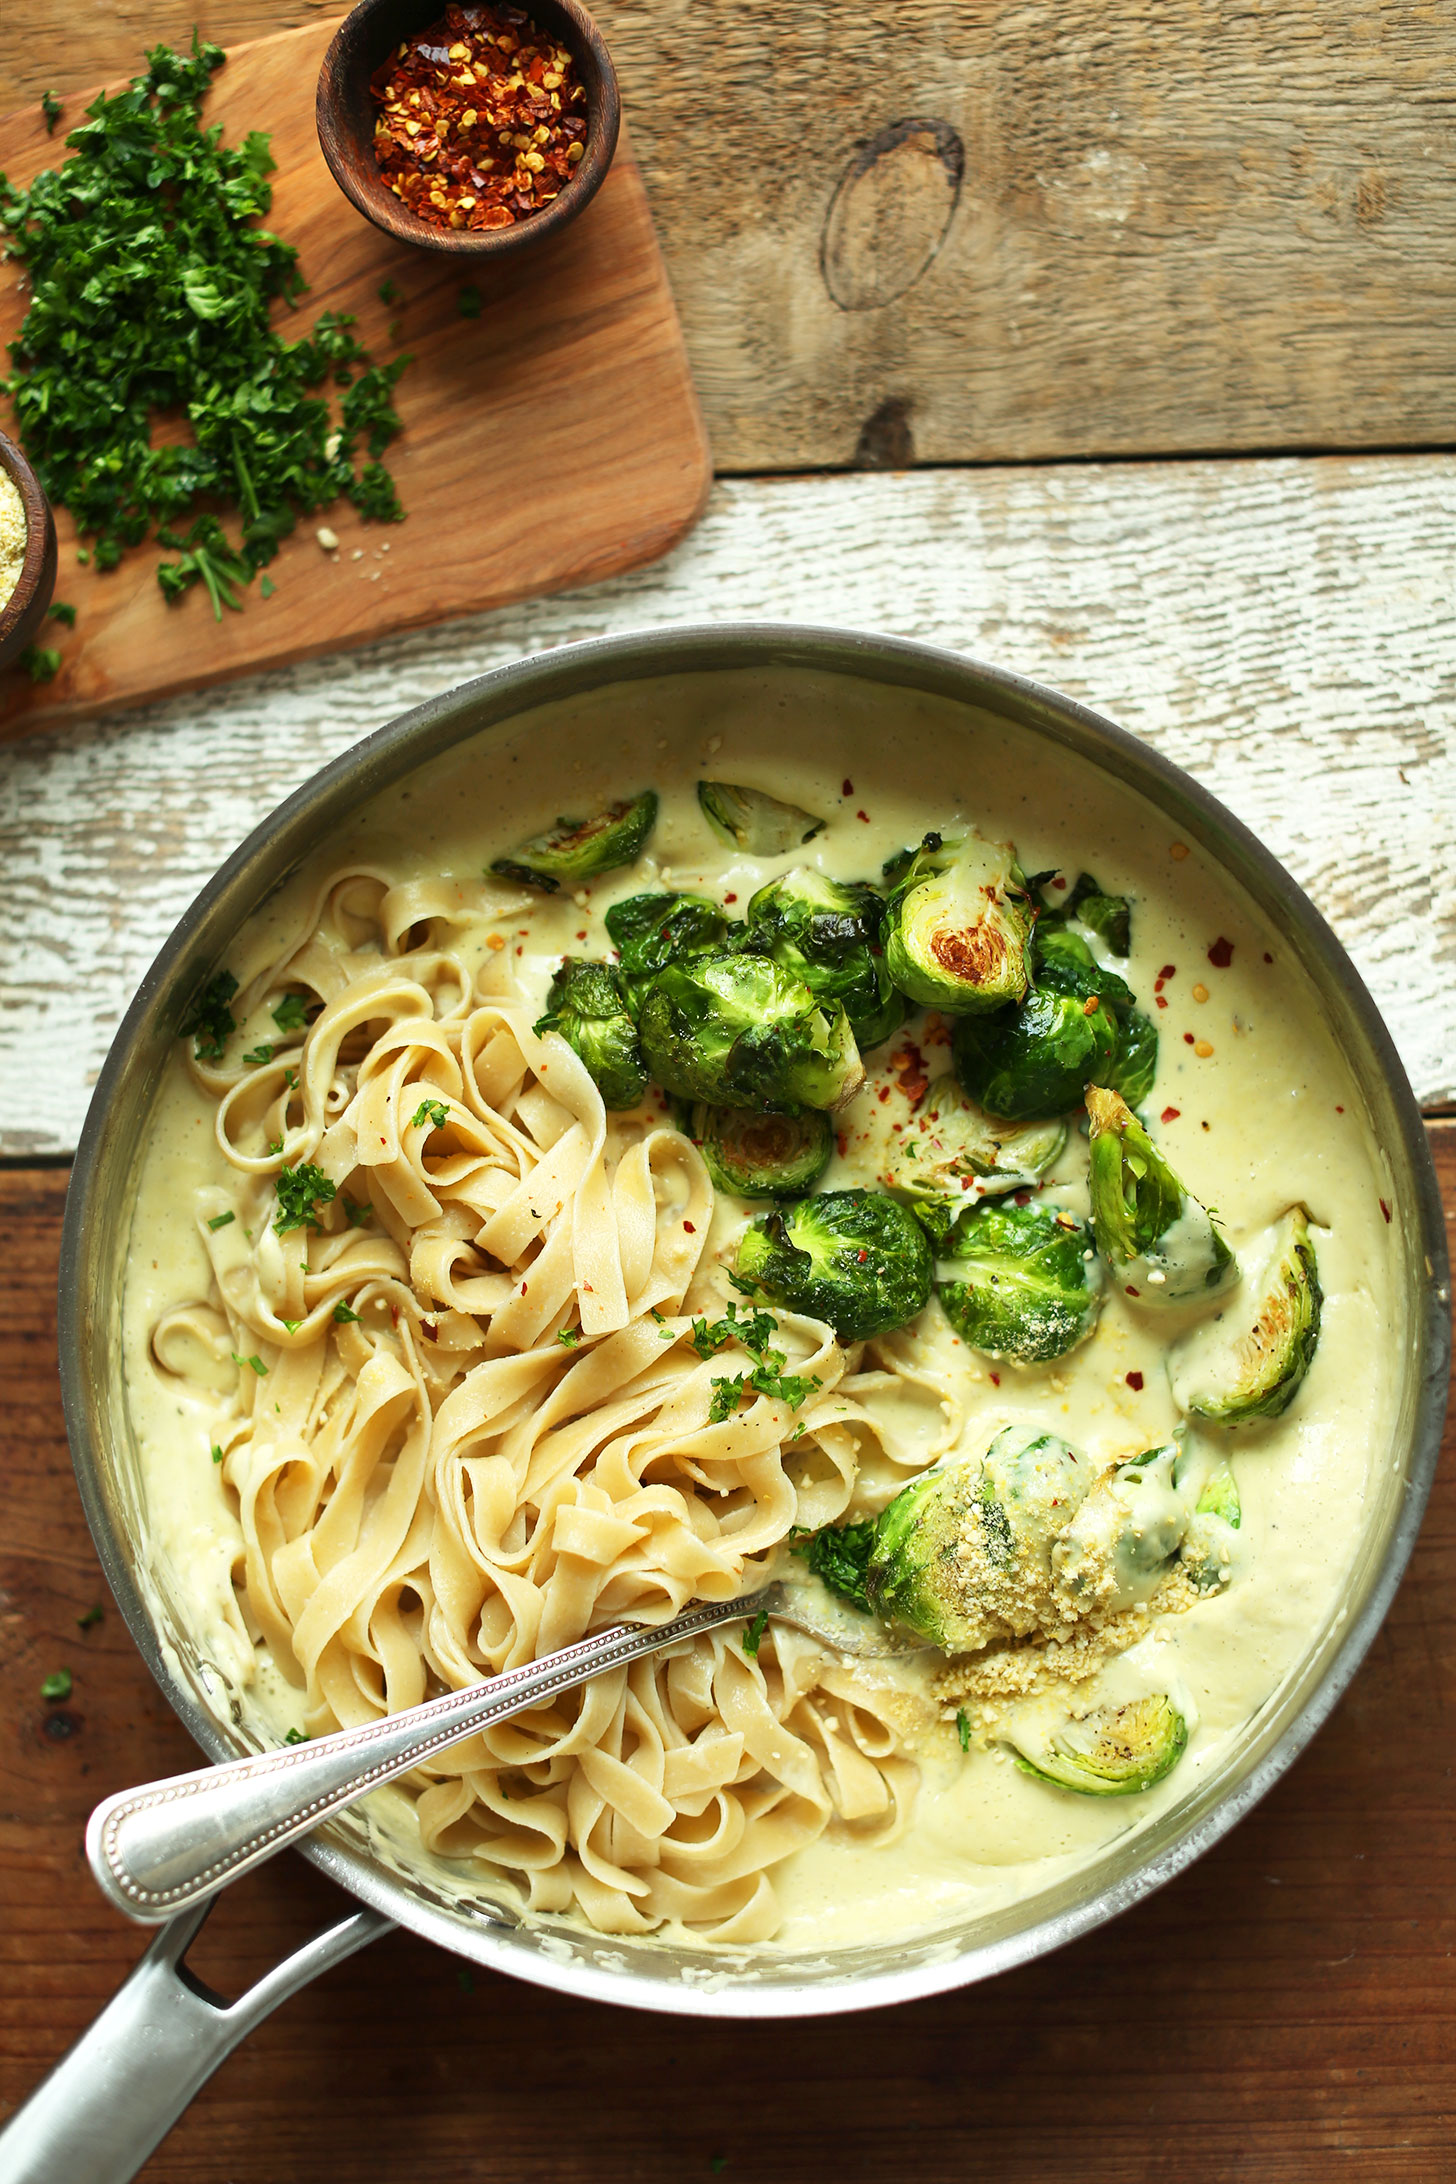 INCREDIBLE 30-minute White Wine + Garlic Alfredo Pasta with Roasted Brussels Sprouts! Quickly becoming a fan favorite for good reason! #vegan #glutenfree #pasta #recipe #plantbased #minimalistbaker